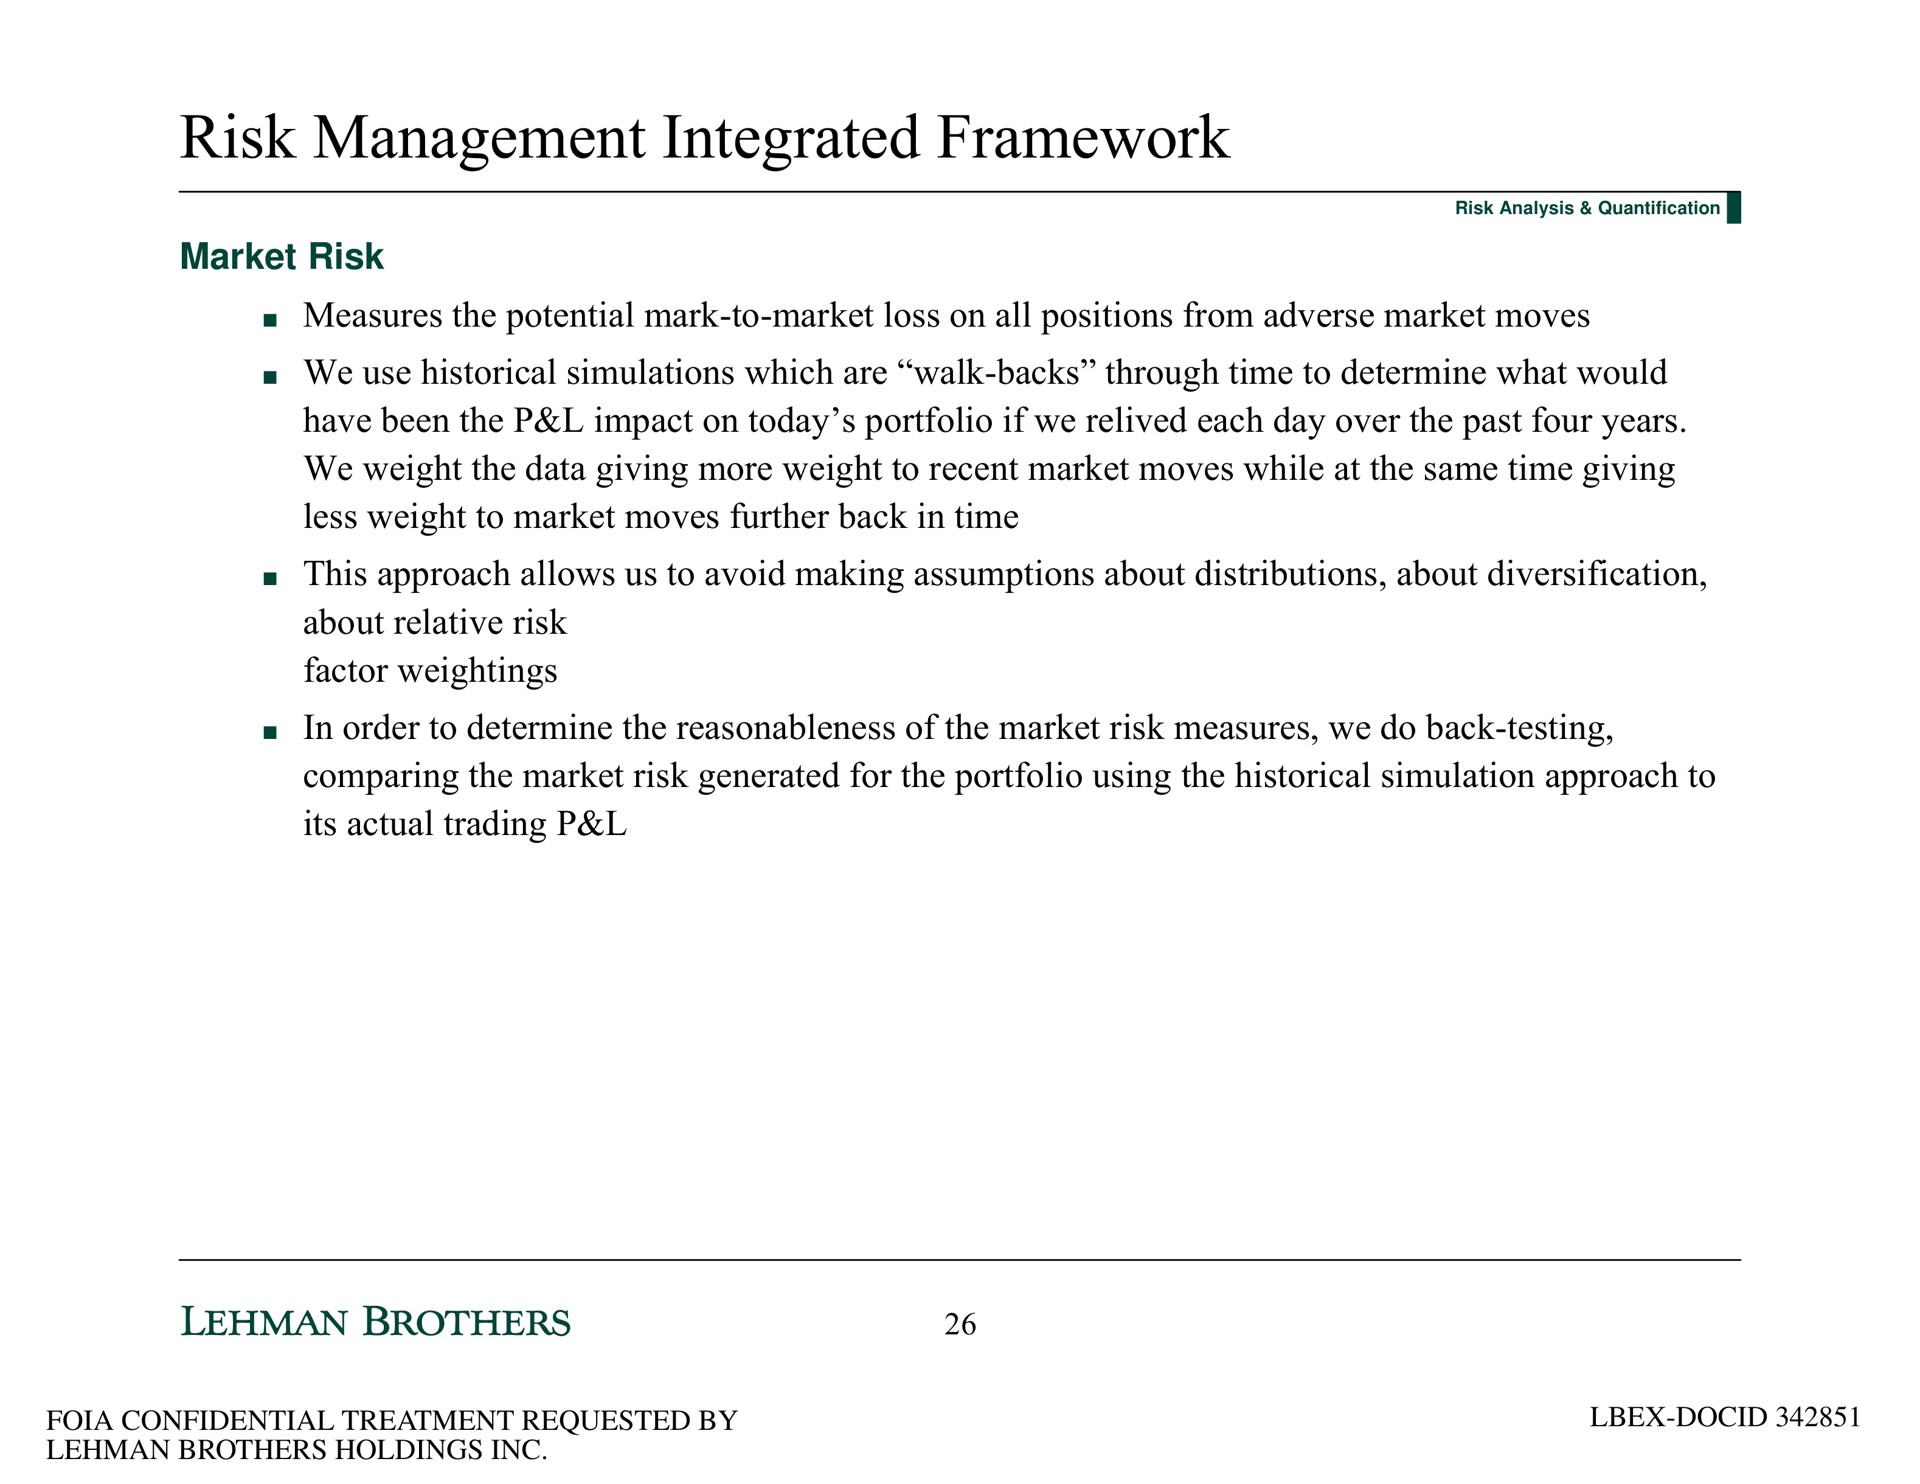 risk management integrated framework market risk measures the potential mark to market loss on all positions from adverse market moves we use historical simulations which are walk backs through time to determine what would have been the impact on today portfolio if we relived each day over the past four years we weight the data giving more weight to recent market moves while at the same time giving less weight to market moves further back in time this approach allows us to avoid making assumptions about distributions about diversification about relative risk factor weightings in order to determine the reasonableness of the market risk measures we do back testing comparing the market risk generated for the portfolio using the historical simulation approach to its actual trading | Lehman Brothers